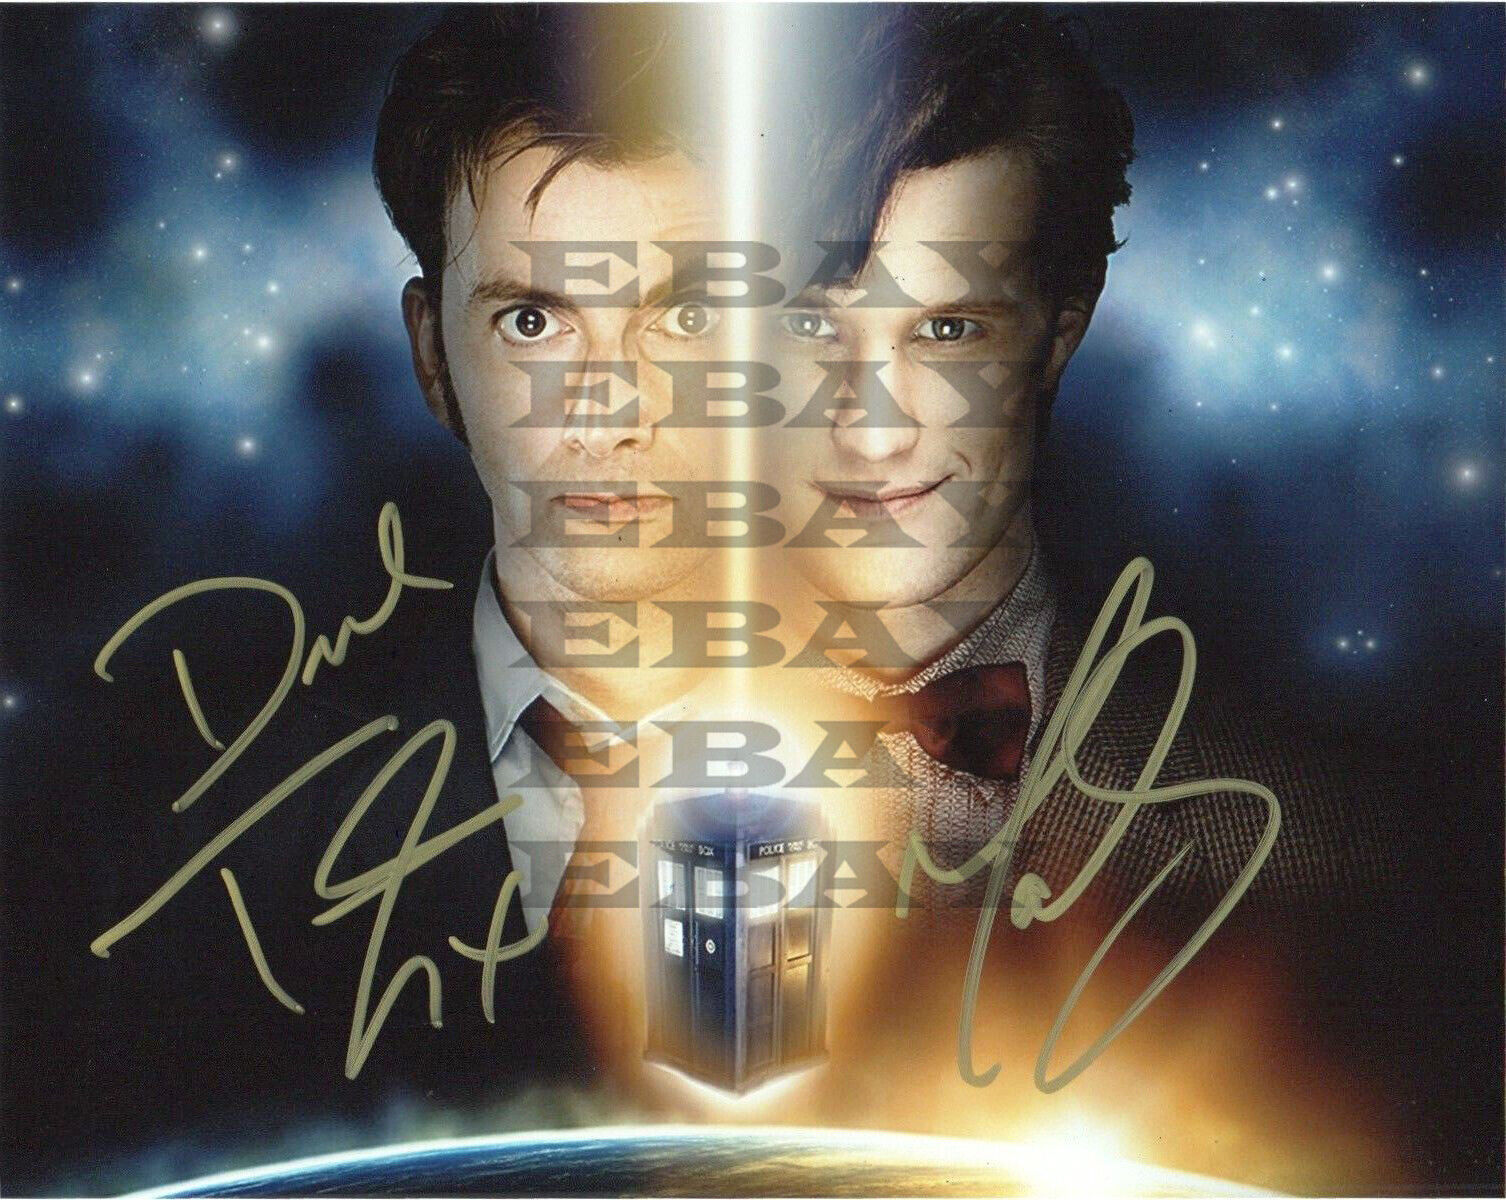 Matt Smith David Tennant Doctor Who Autographed Signed 8x10 Photo Poster painting Reprint